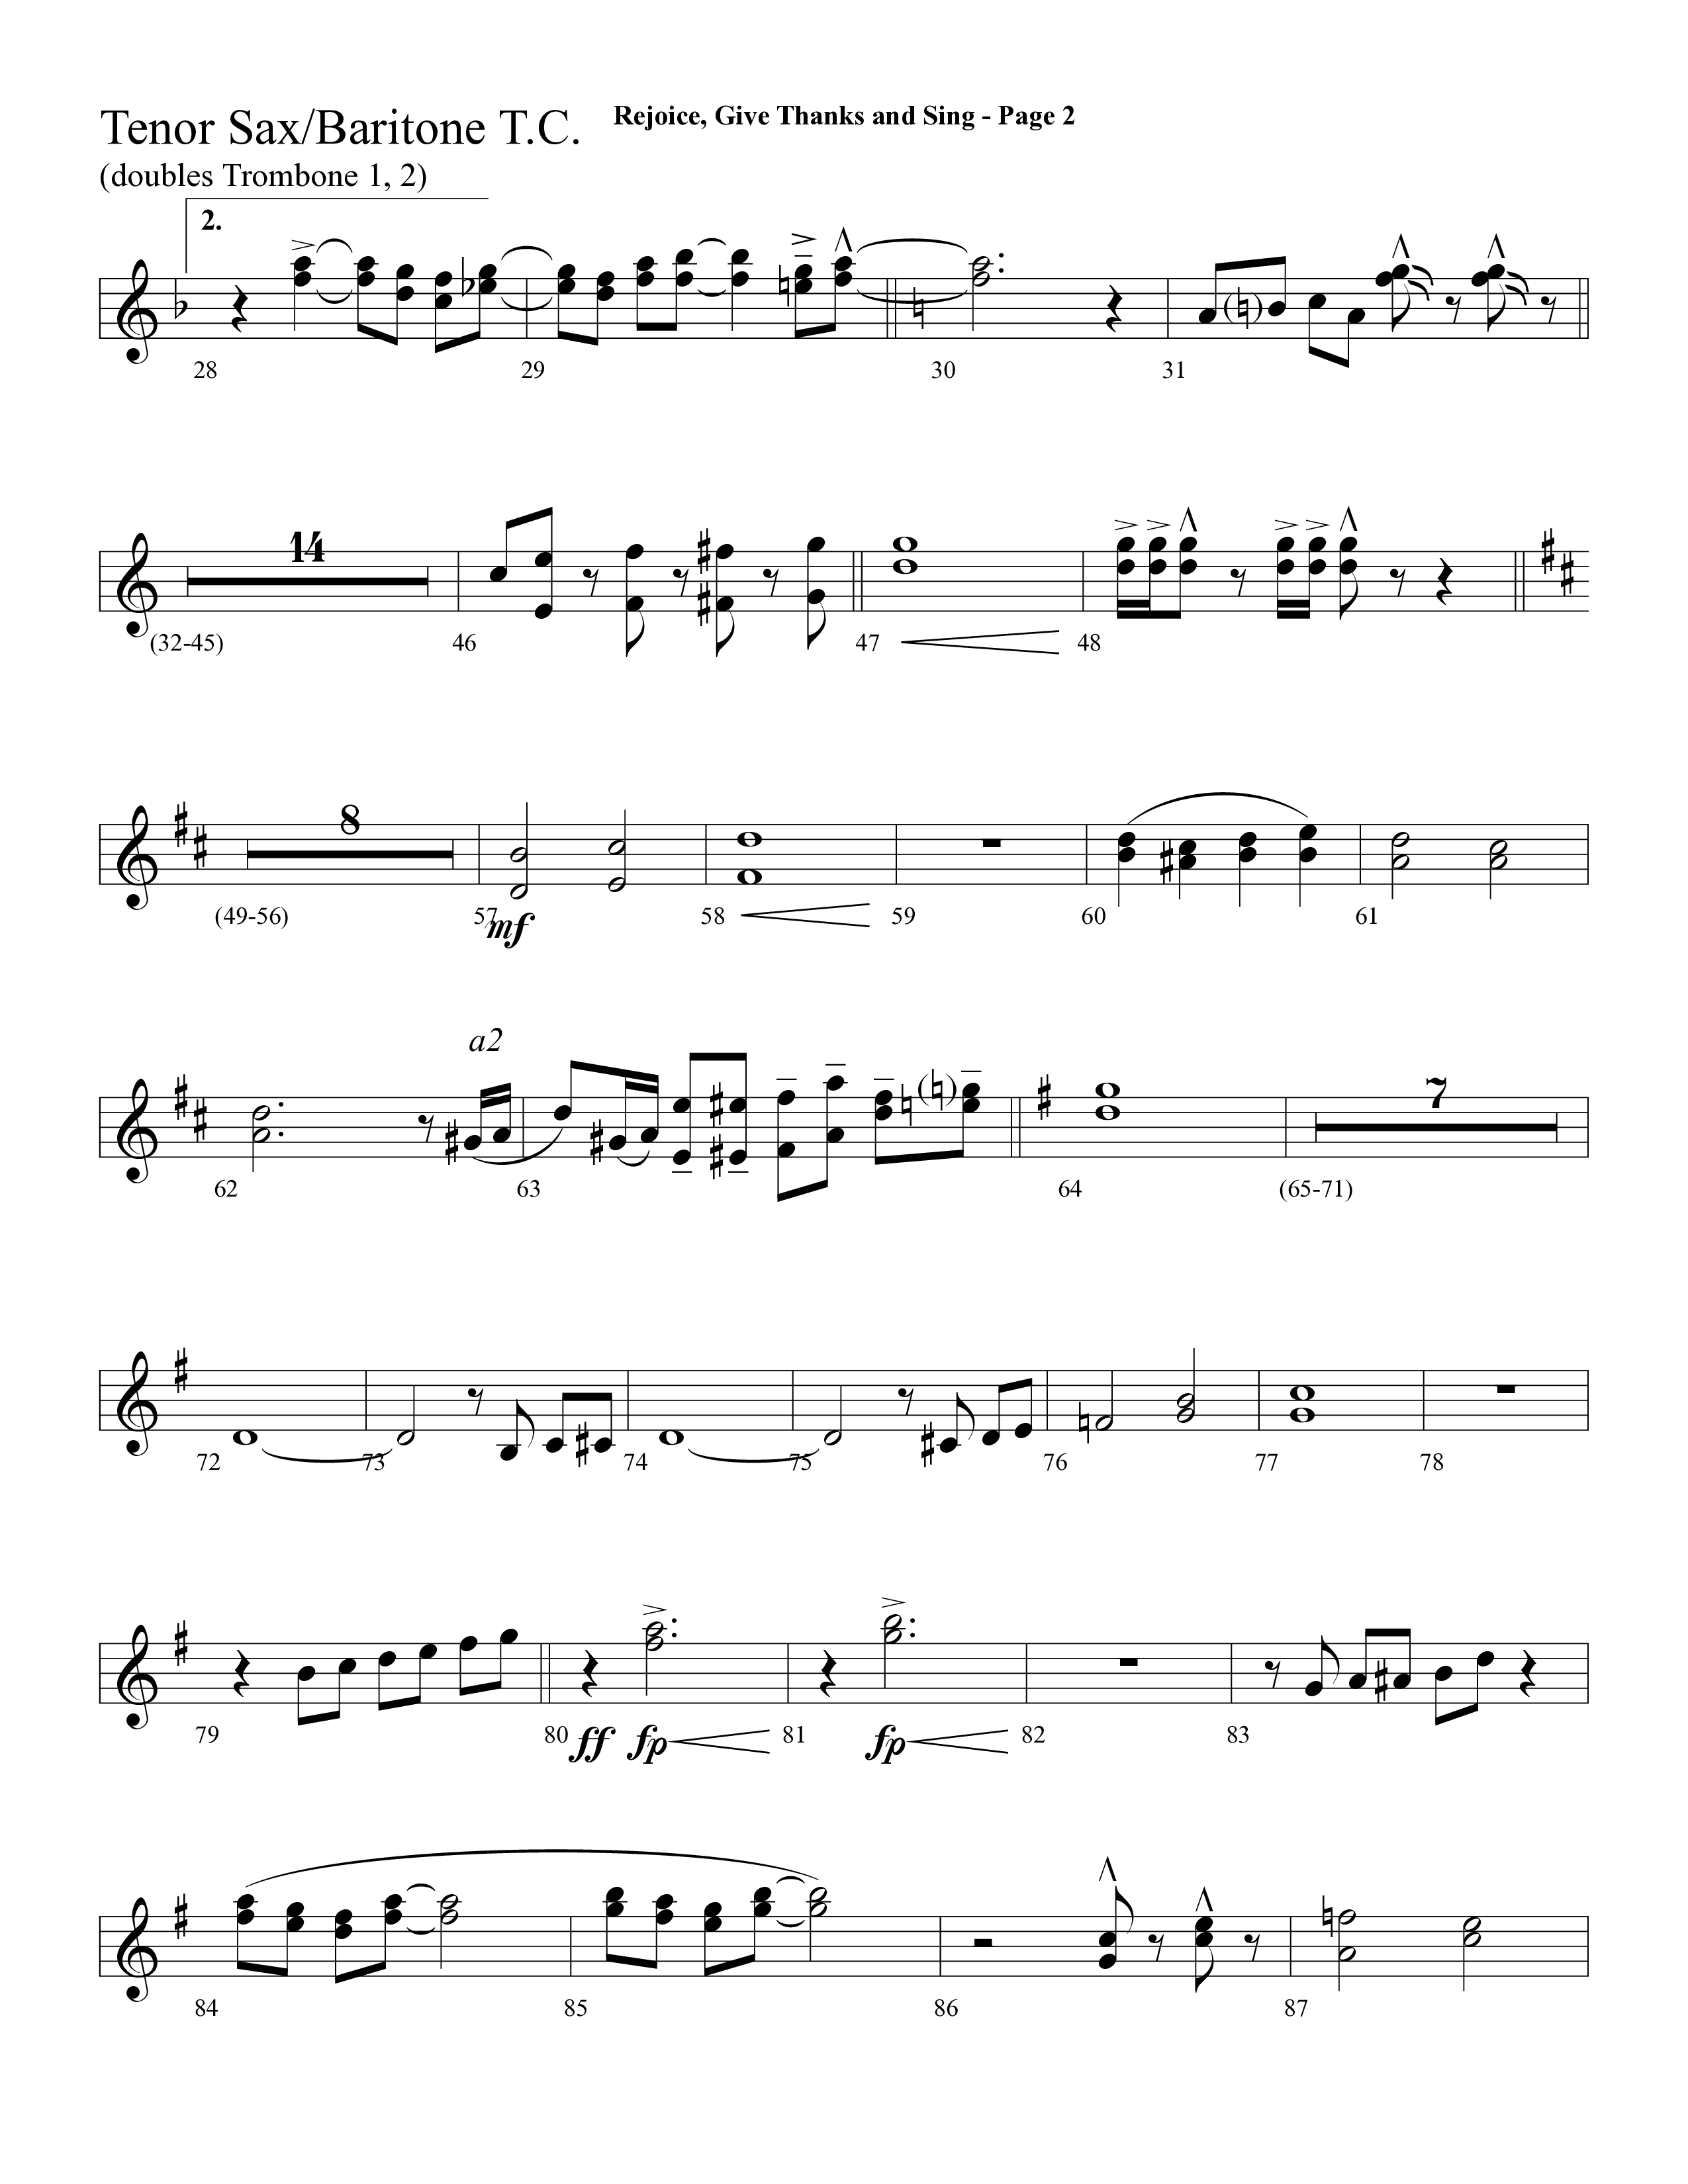 Rejoice, Give Thanks And Sing (with Rejoice, The Lord Is King, Come, Thou Almighty King) (Choral Anthem SATB) Tenor Sax/Baritone T.C. (Lifeway Choral / Arr. Dave Williamson)